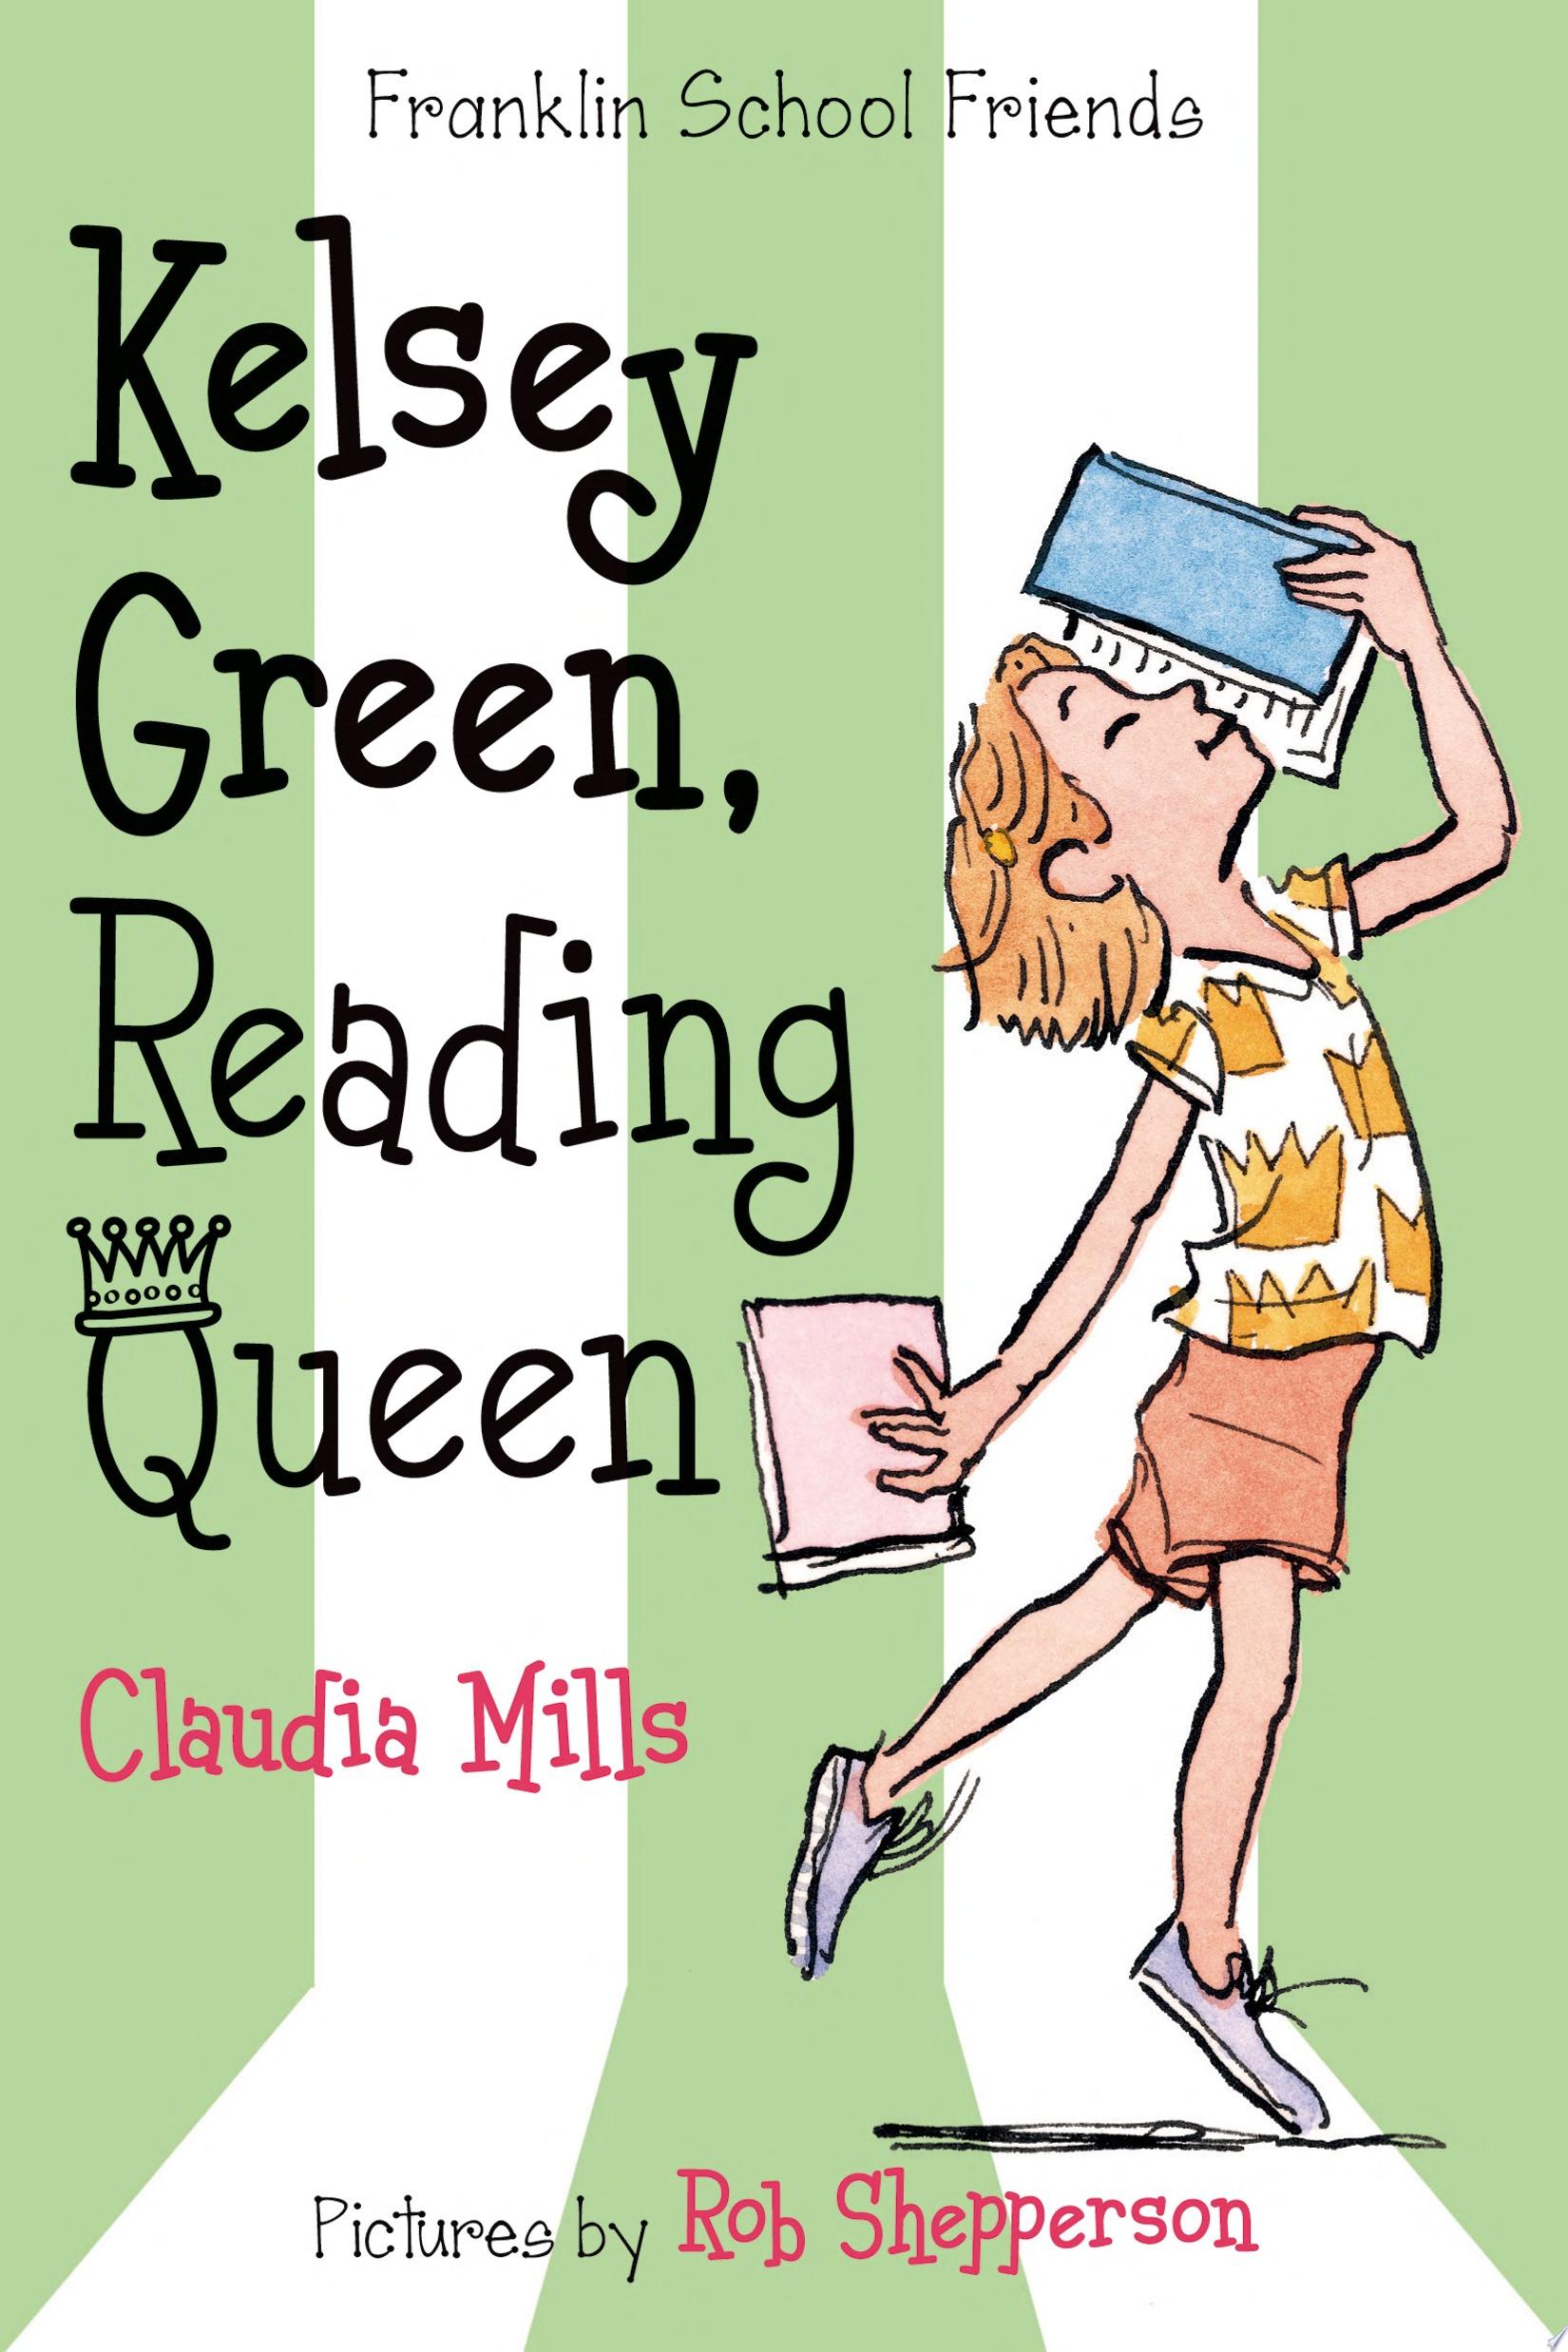 Image for "Kelsey Green, Reading Queen"